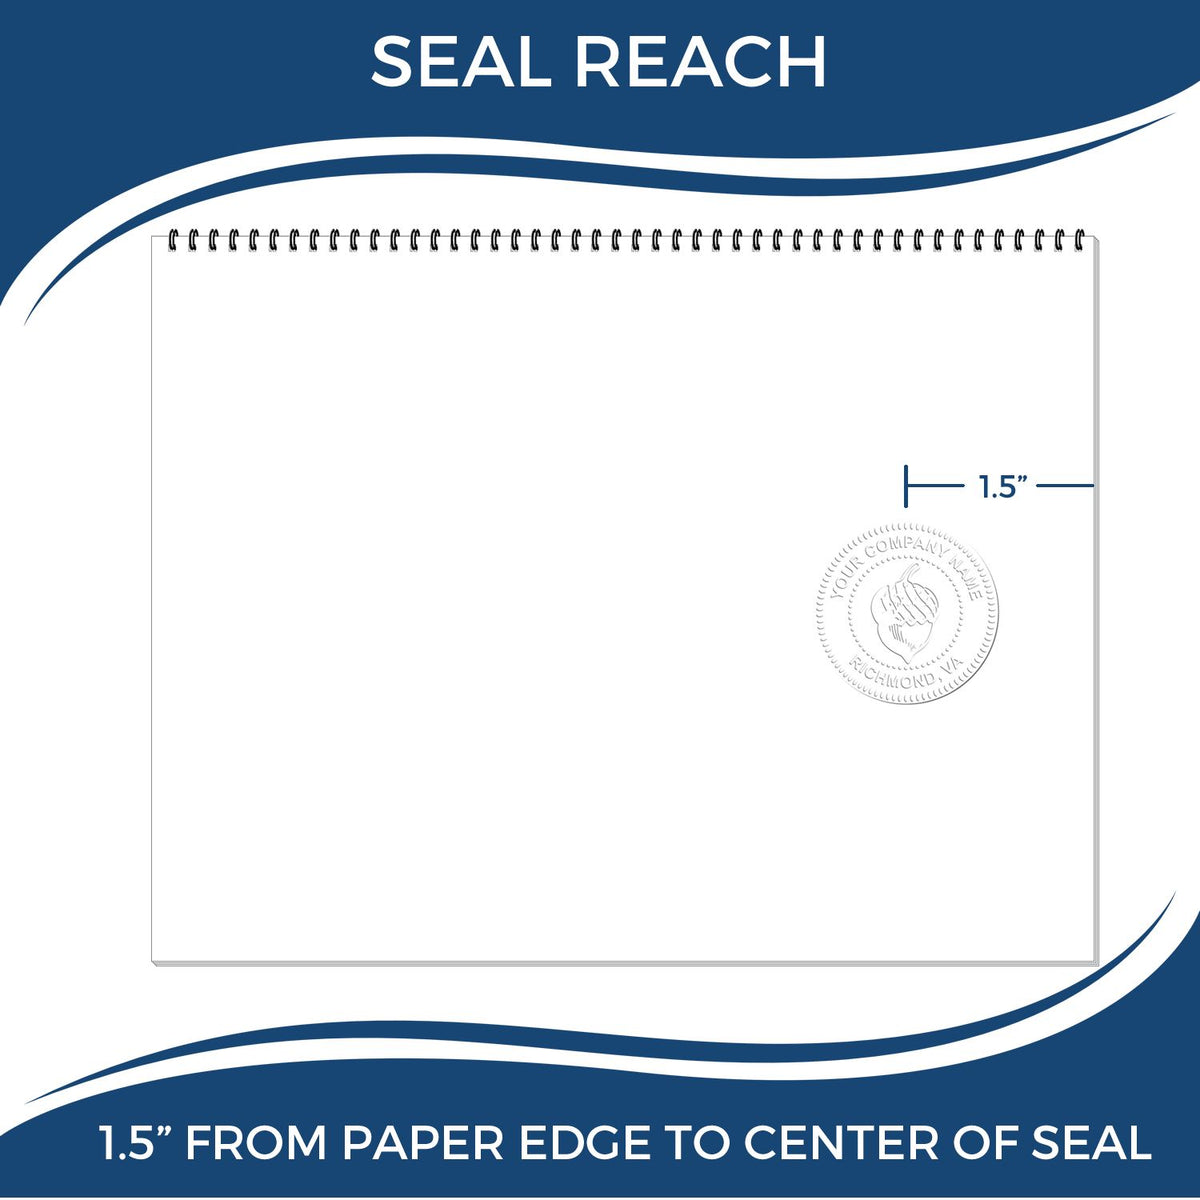 An infographic showing the seal reach which is represented by a ruler and a miniature seal image of the West Virginia Geologist Desk Seal